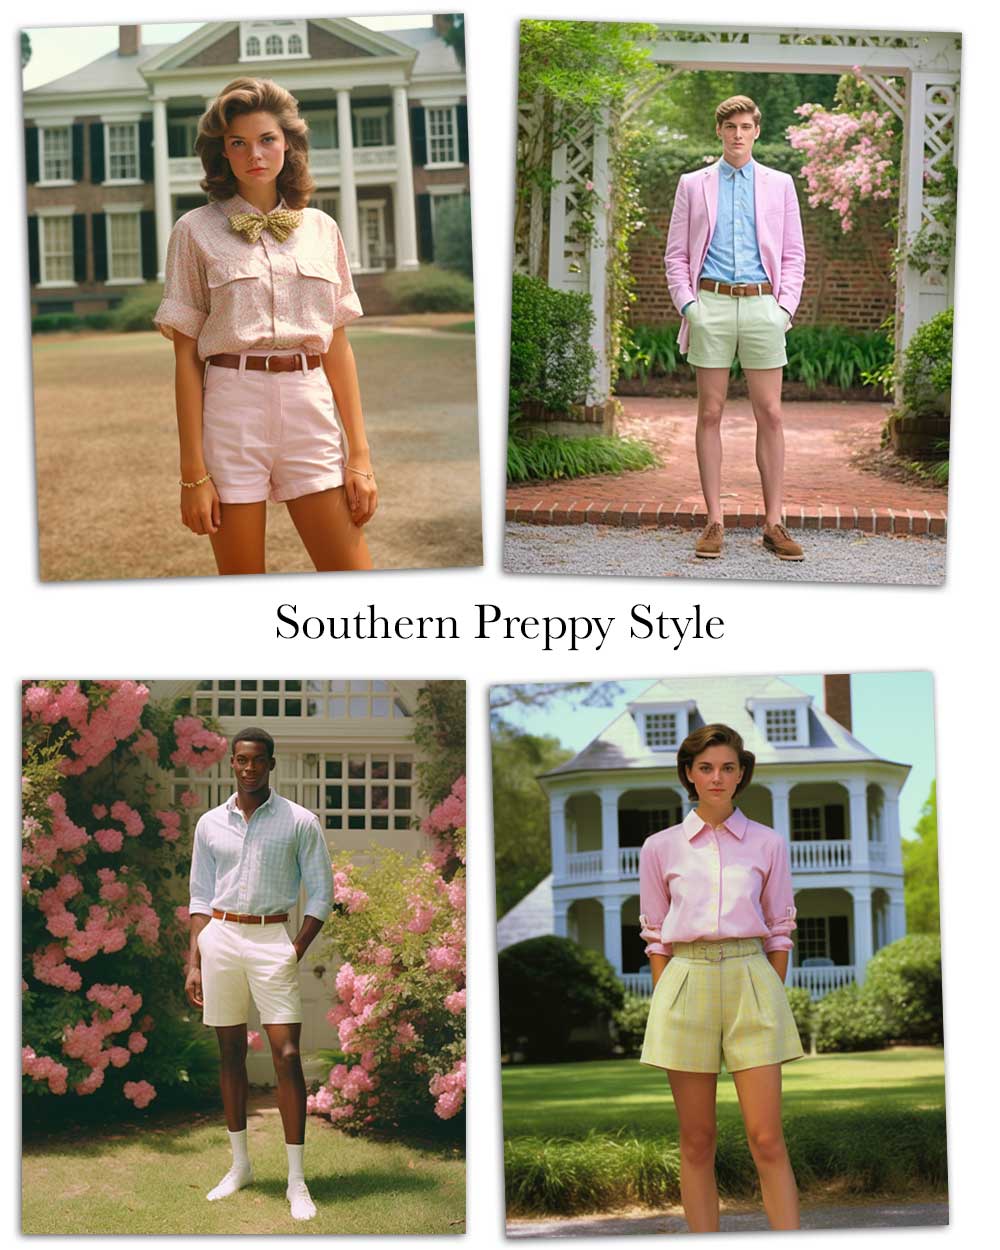 Southern Preppy style dressing